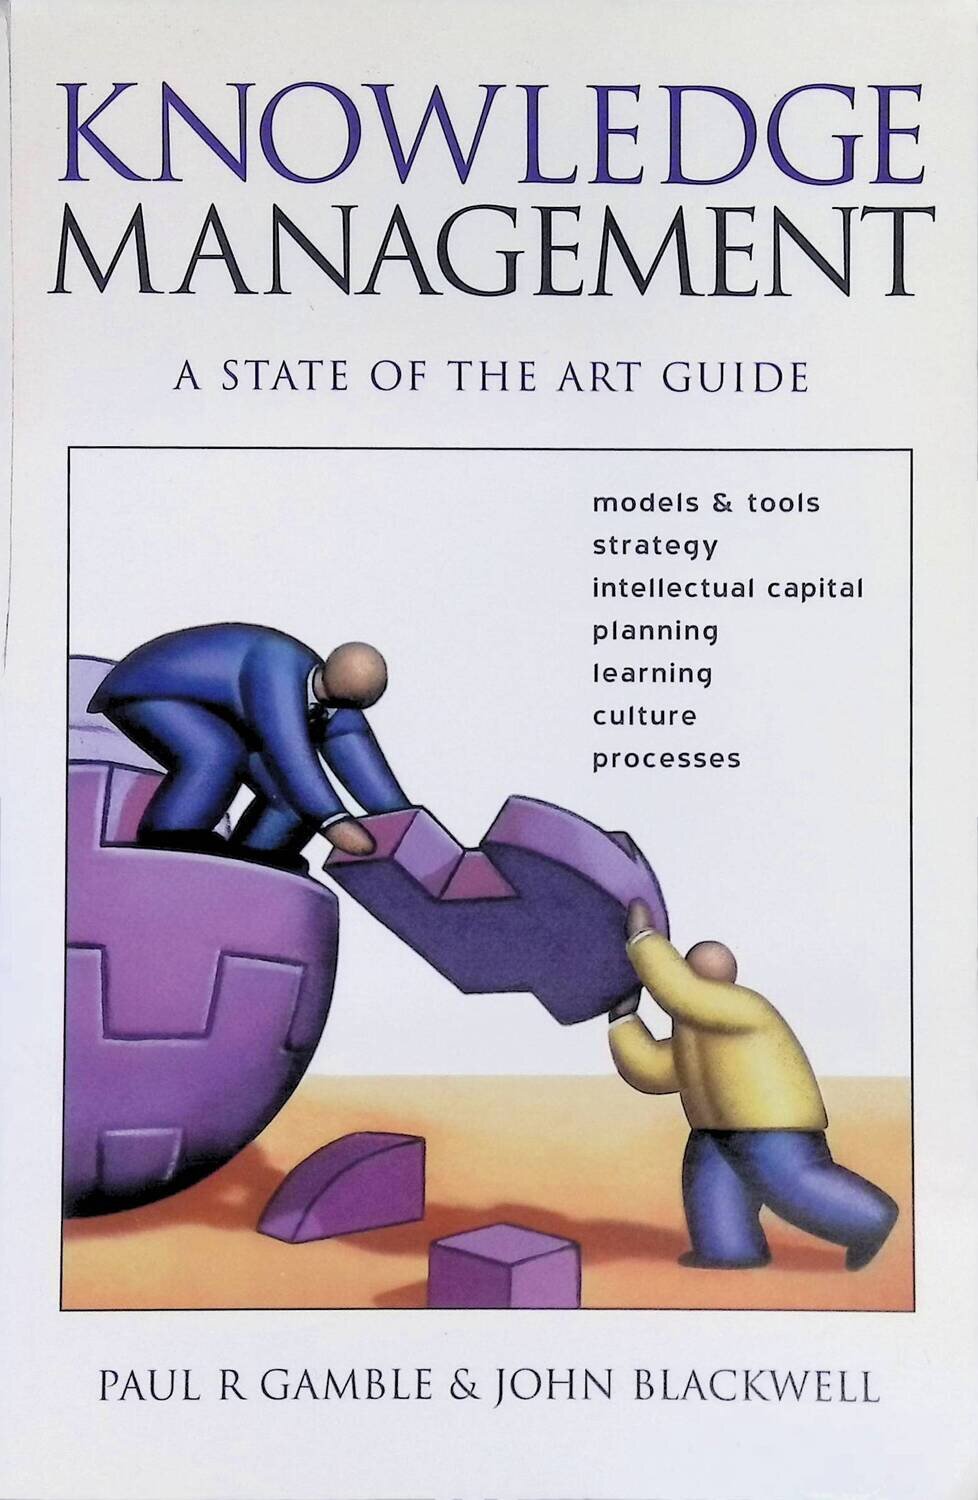 Knowledge Management: A State of Art Guide; Gamble Paul R., Blackwell John